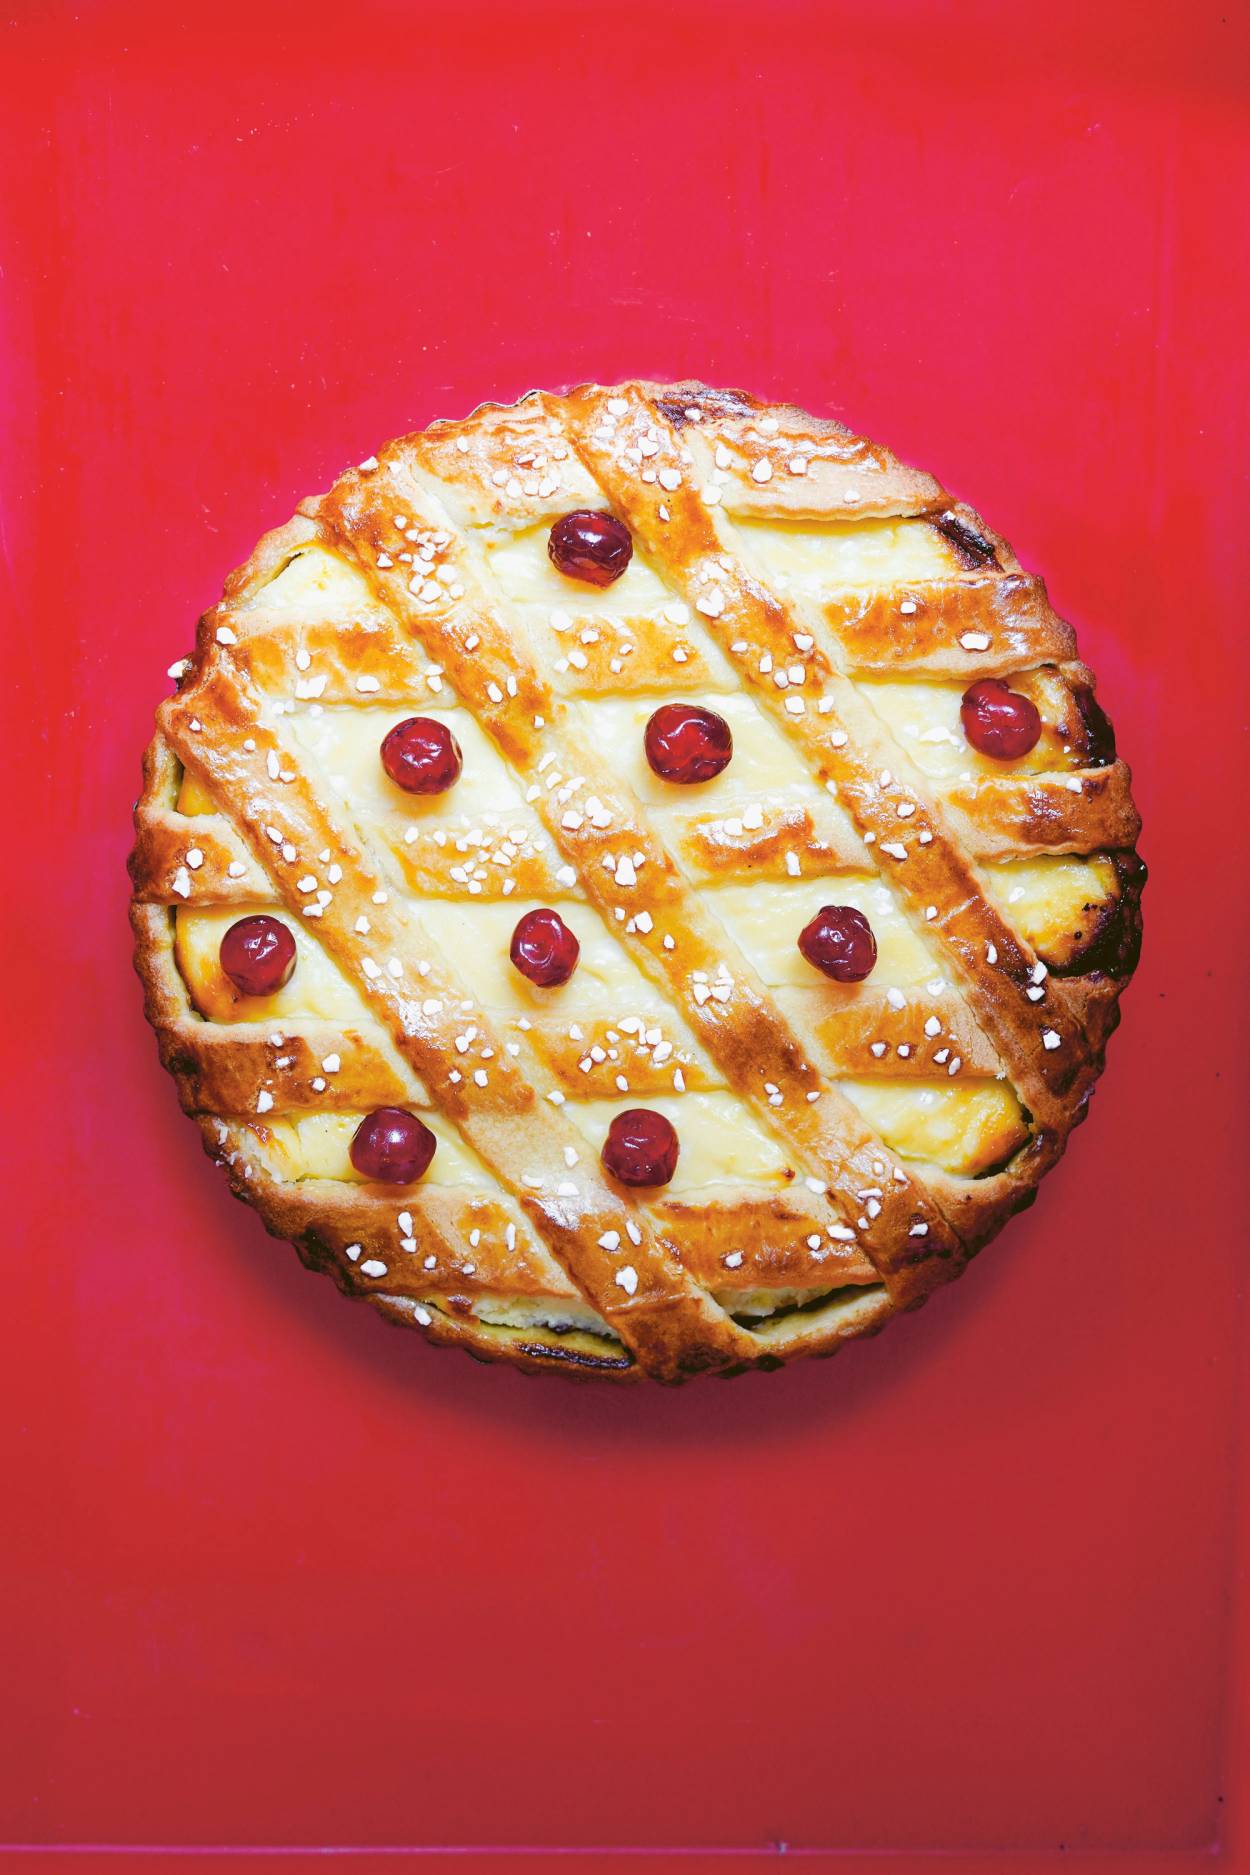 From ‘New European Baking: 99 Recipes for Breads, Brioches and Pastries,’ by Laurel Kratochvila (Prestel)